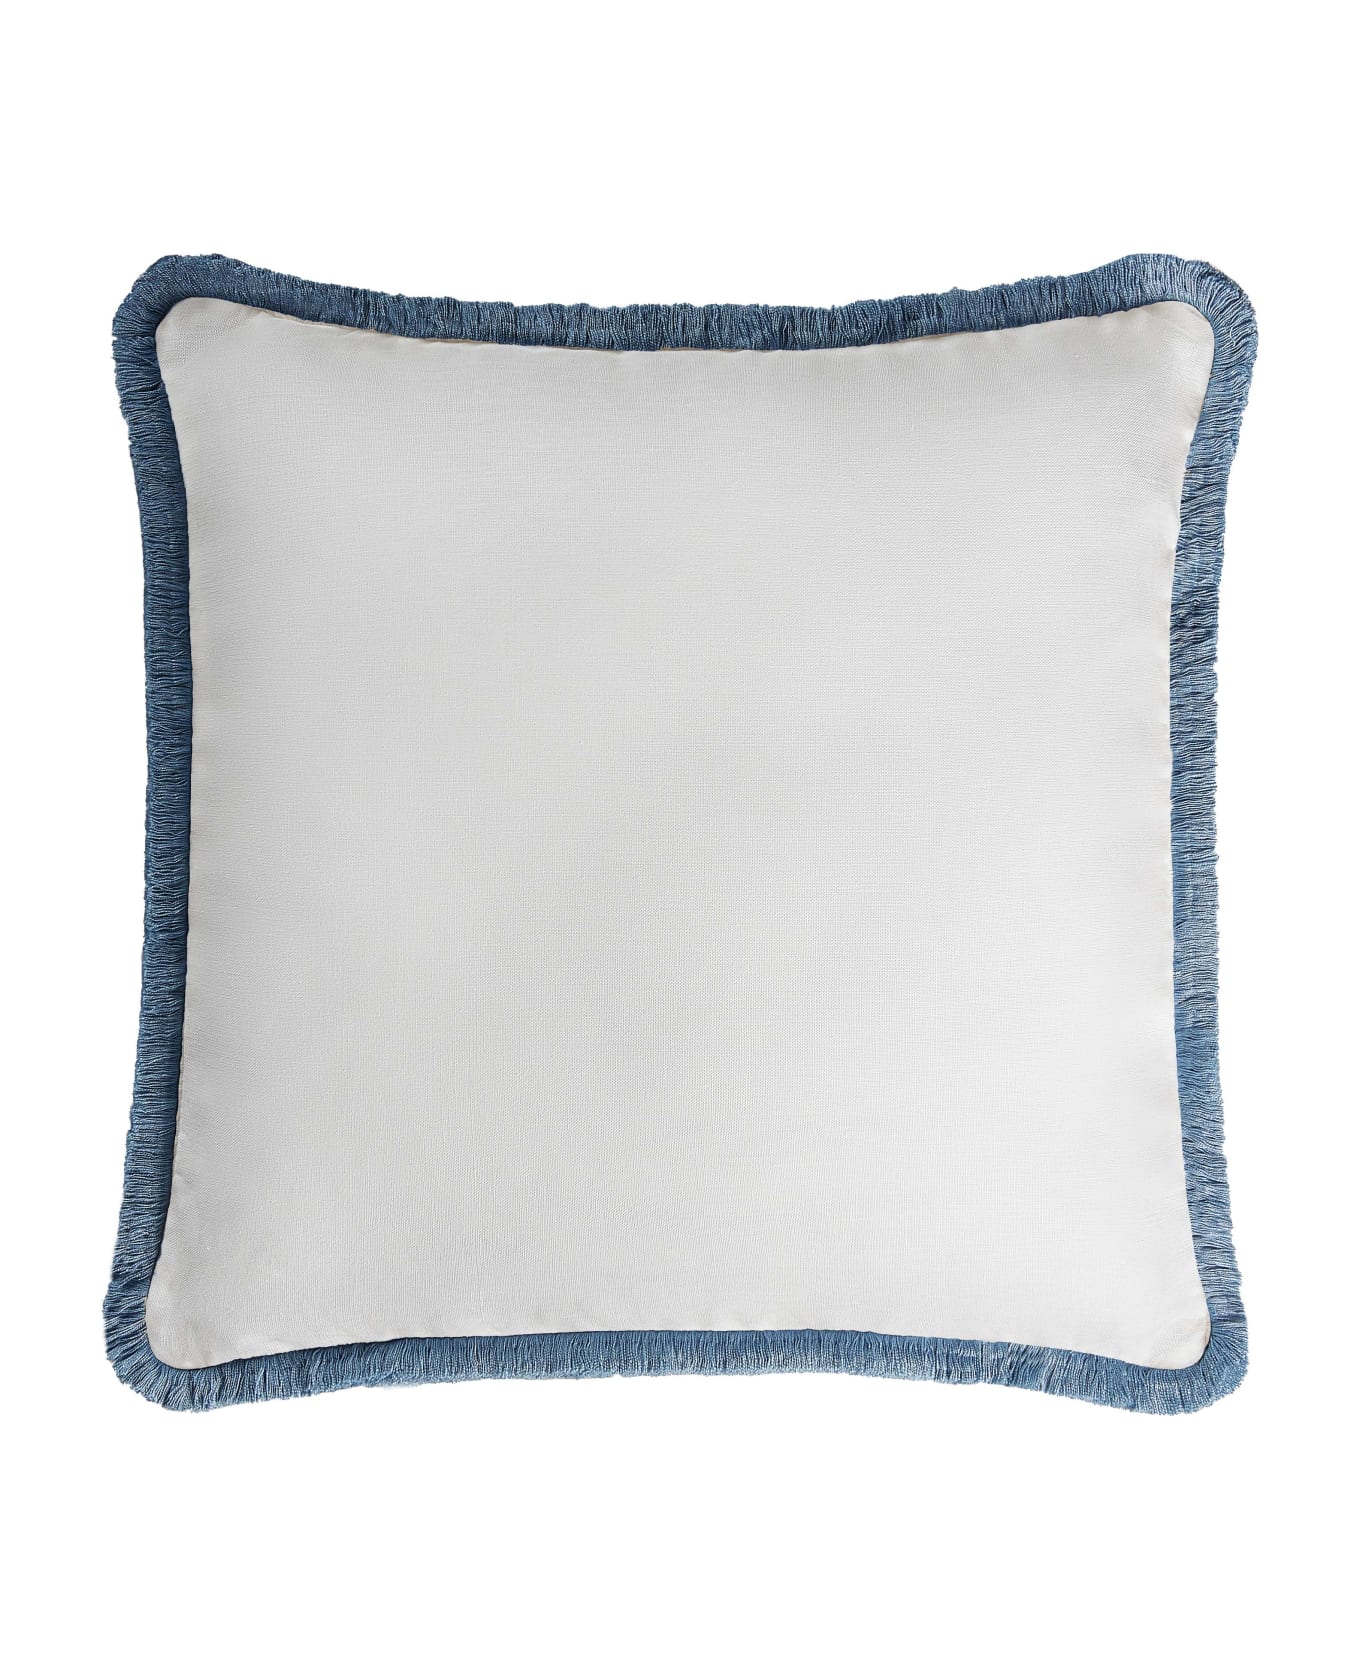 Lo Decor Happy Linen Pillow - Save up to 40